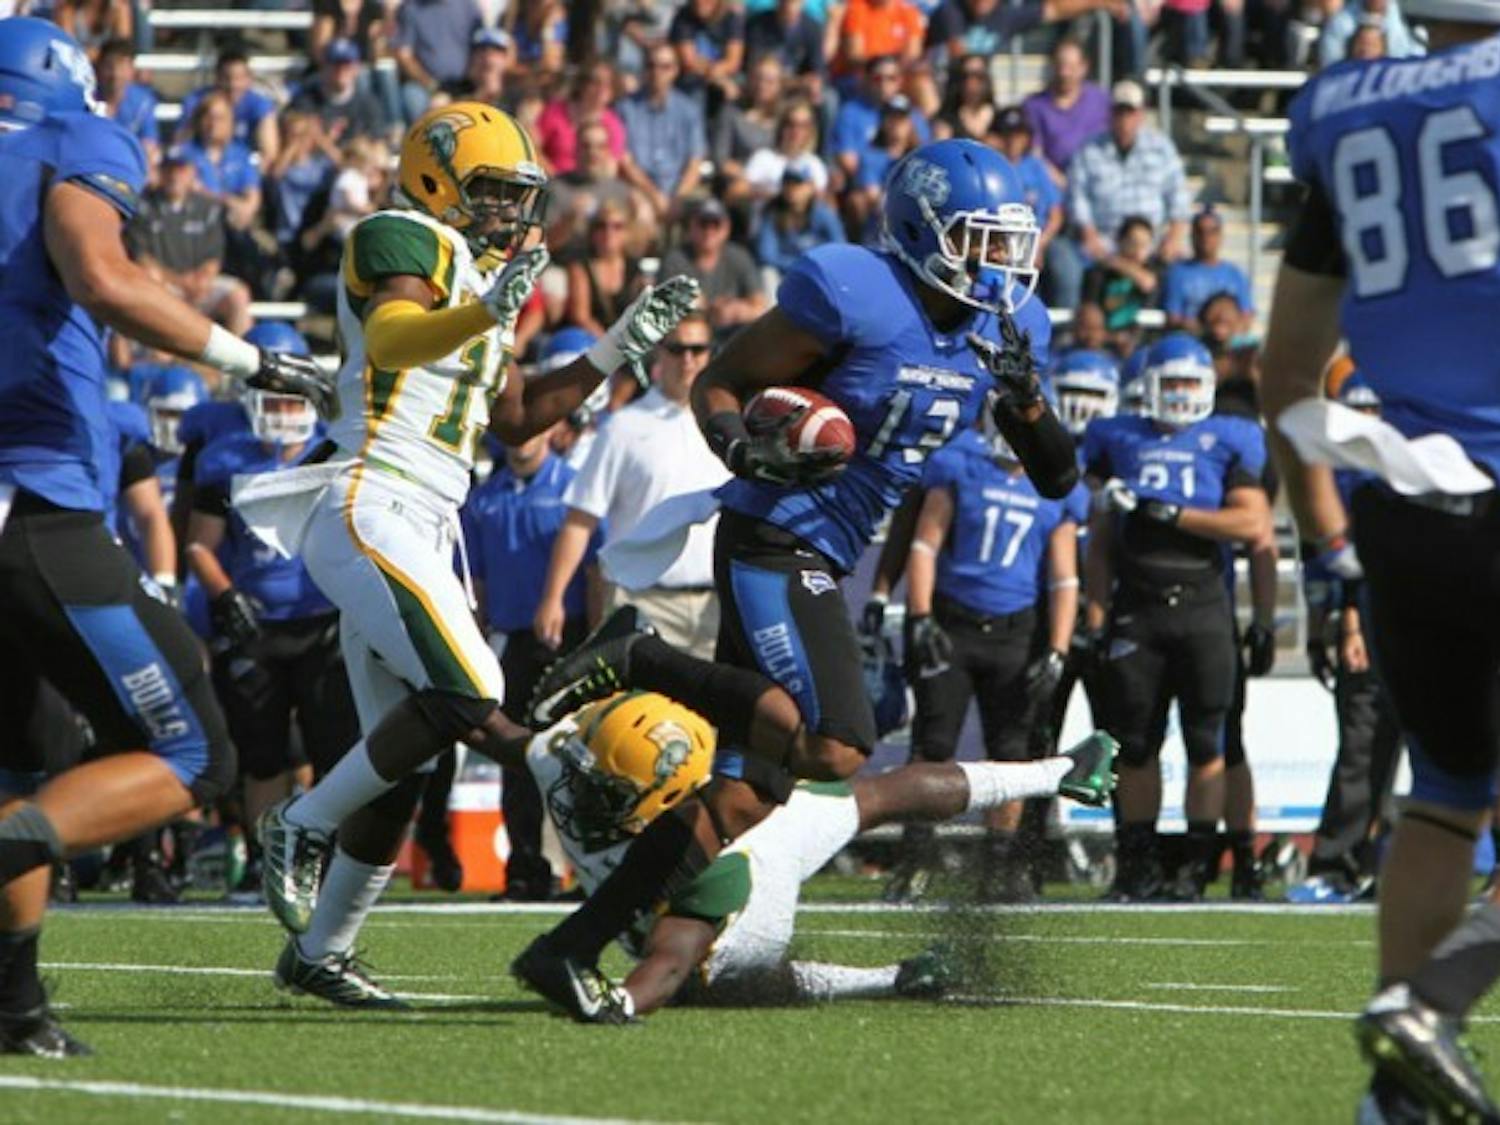 Senior wide receiver Devon Hughes scores a 92-yard touchdown in the first quarter of Buffalo&#39;s 36-7 victory over Norfolk State Saturday. The play set a new program-record for longest receiving touchdown.
Chad Cooper, The Spectrum